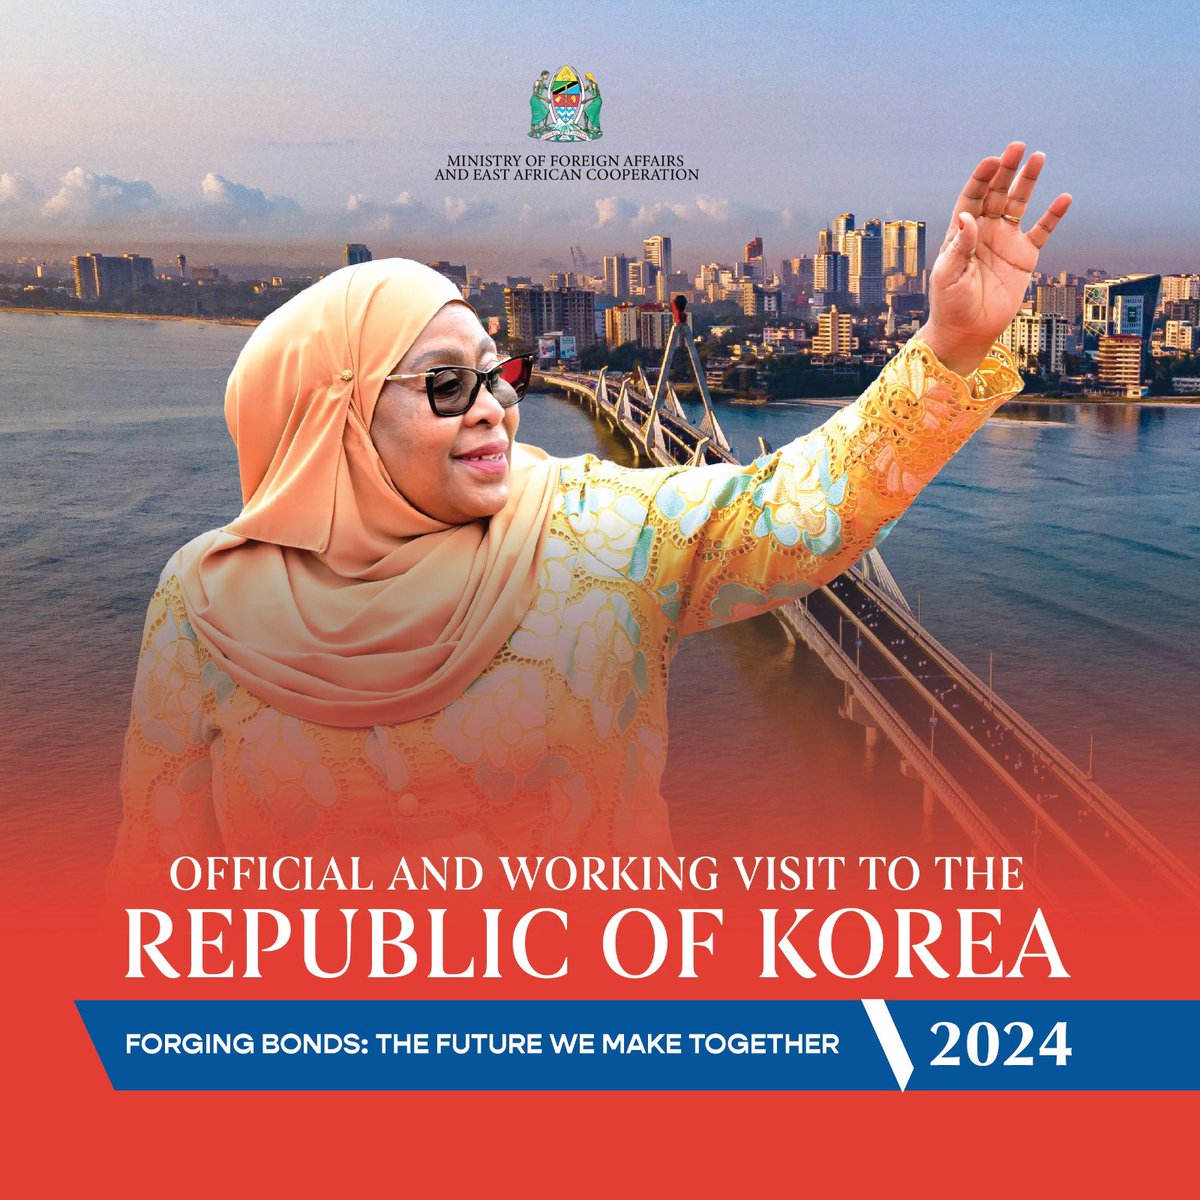 Honouring the strong diplomatic and political ties between our two nations, H.E. @SuluhuSamia will visit the Republic of Korea from May 31th to June 6th 2024 at the invitation of the President of Republic of Korea, H.E. @President_KR. During her official visit (1st to 2nd